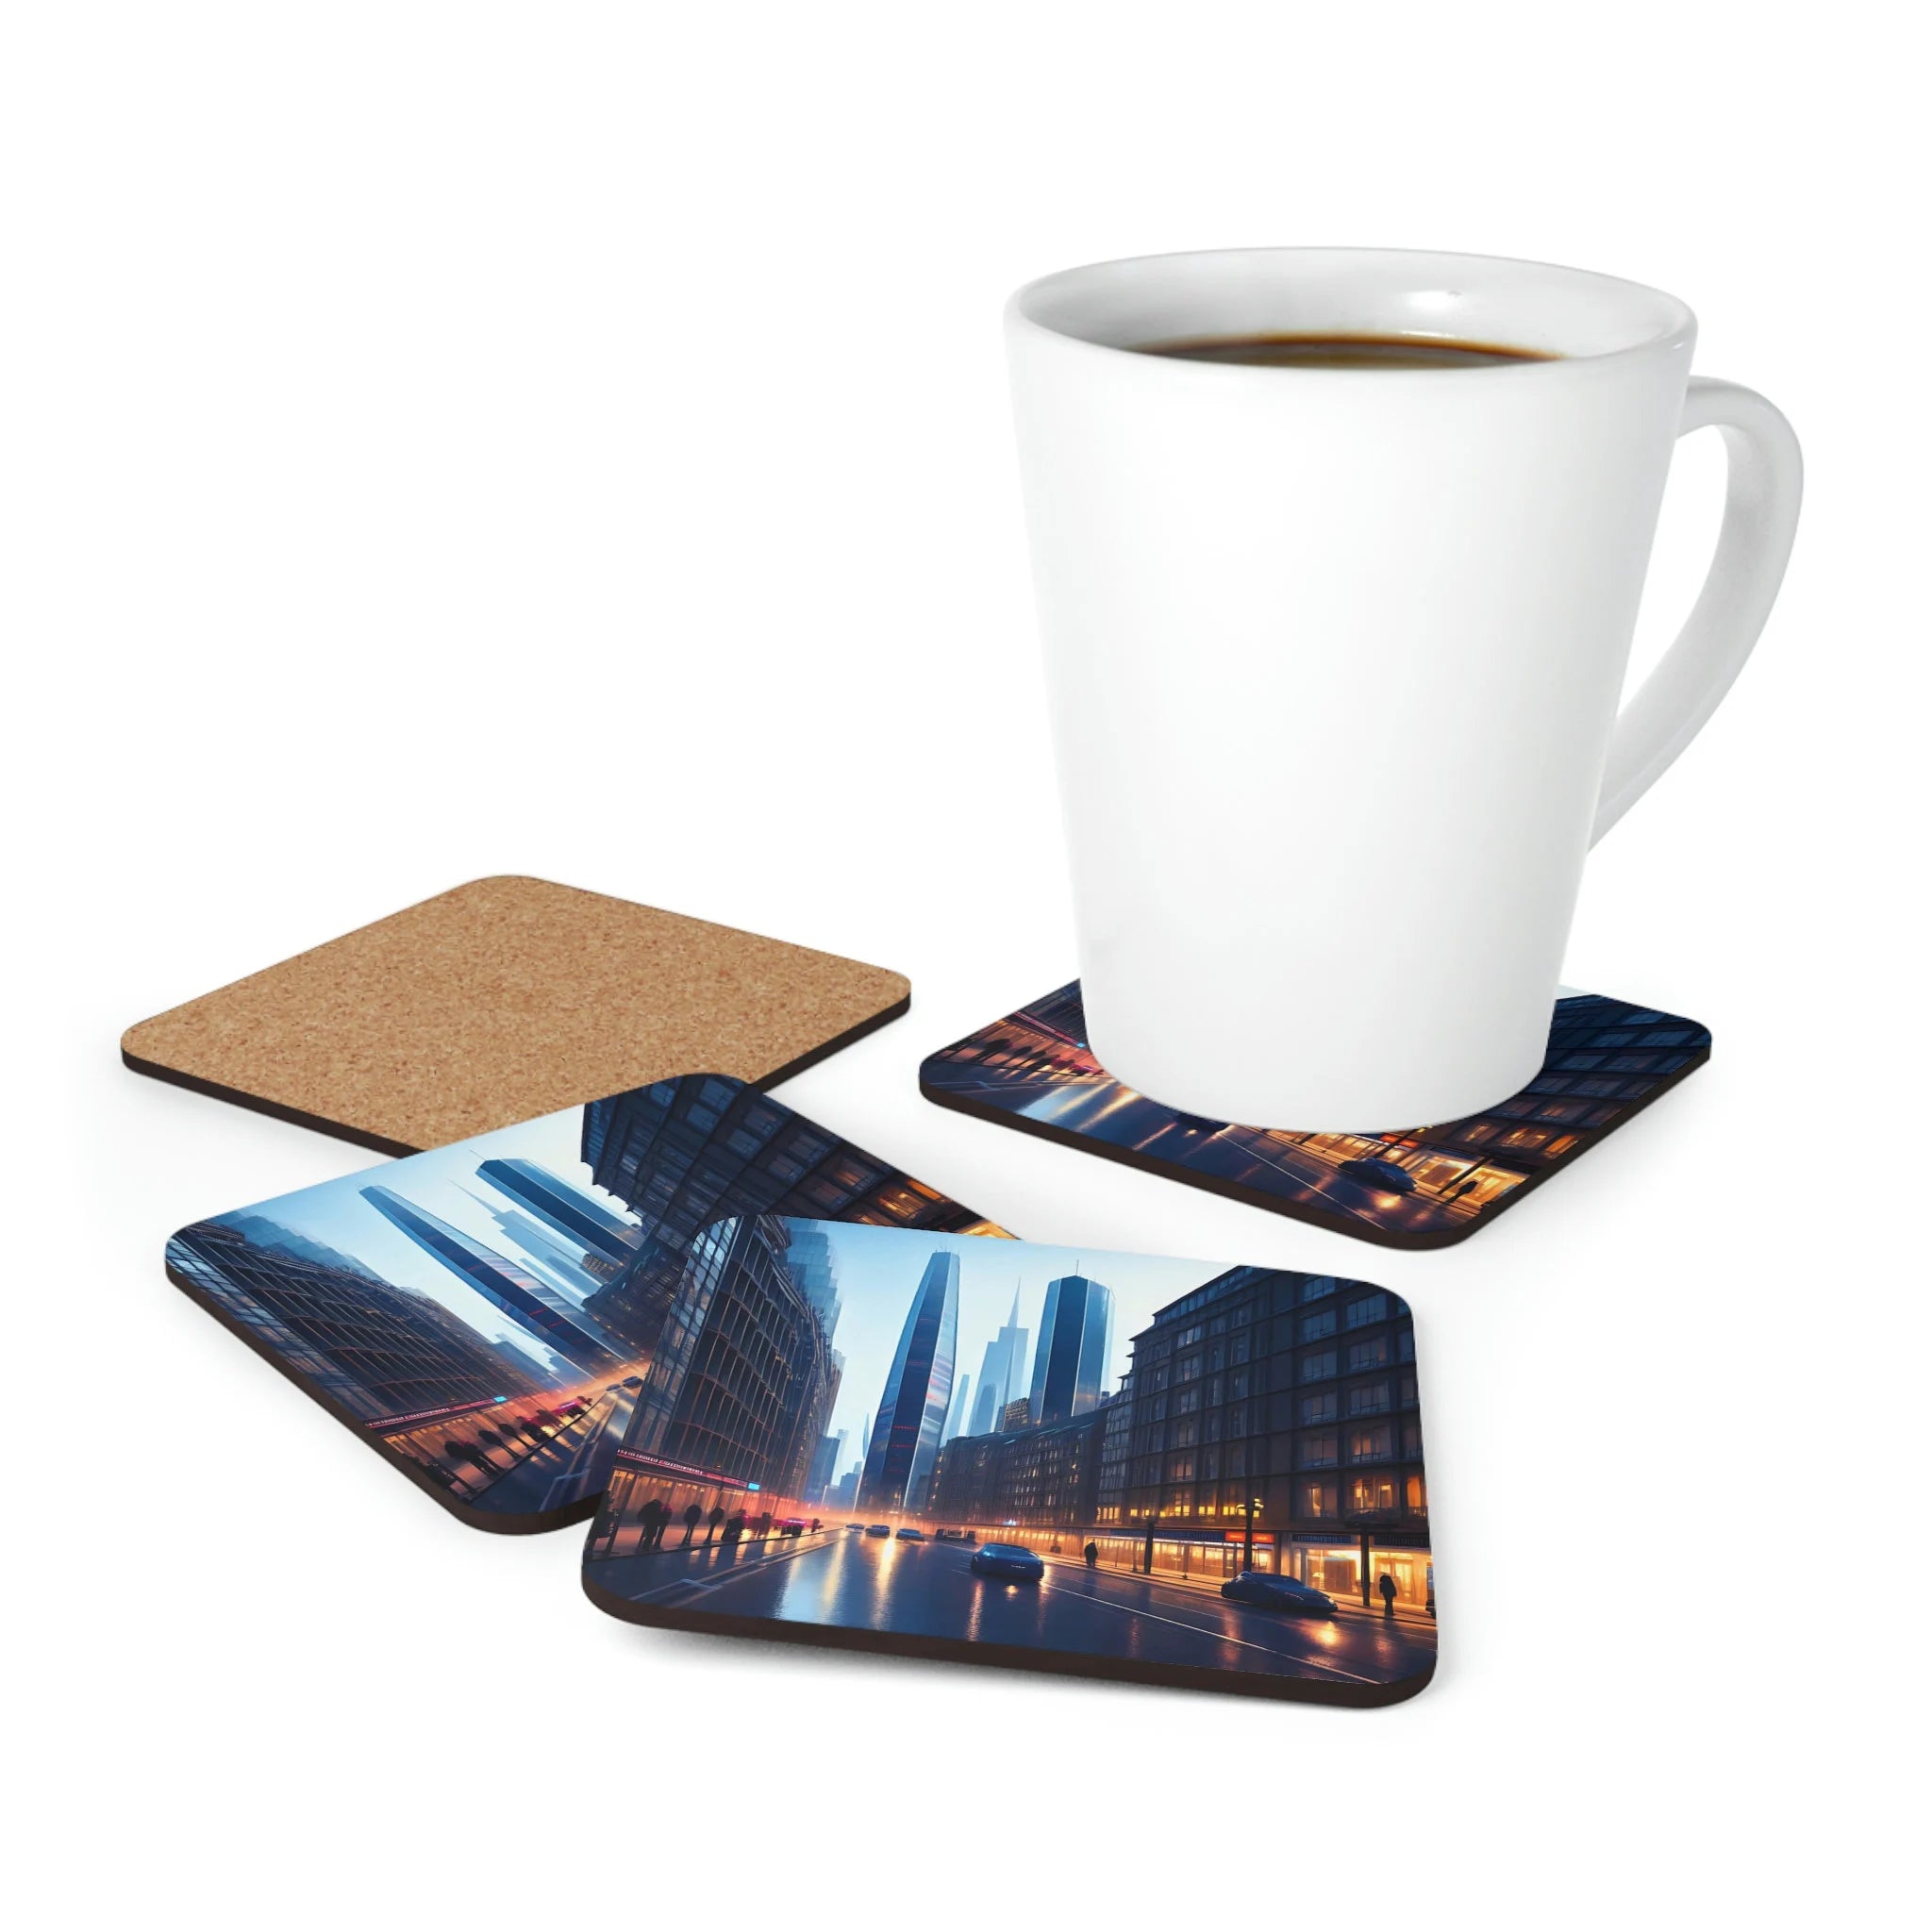 DealChanger Coaster Collection.  Digitally crafted and printing beautiful designs from all major cities such as Japan, France, Egypt, Bhutan, England, Spain & much more!